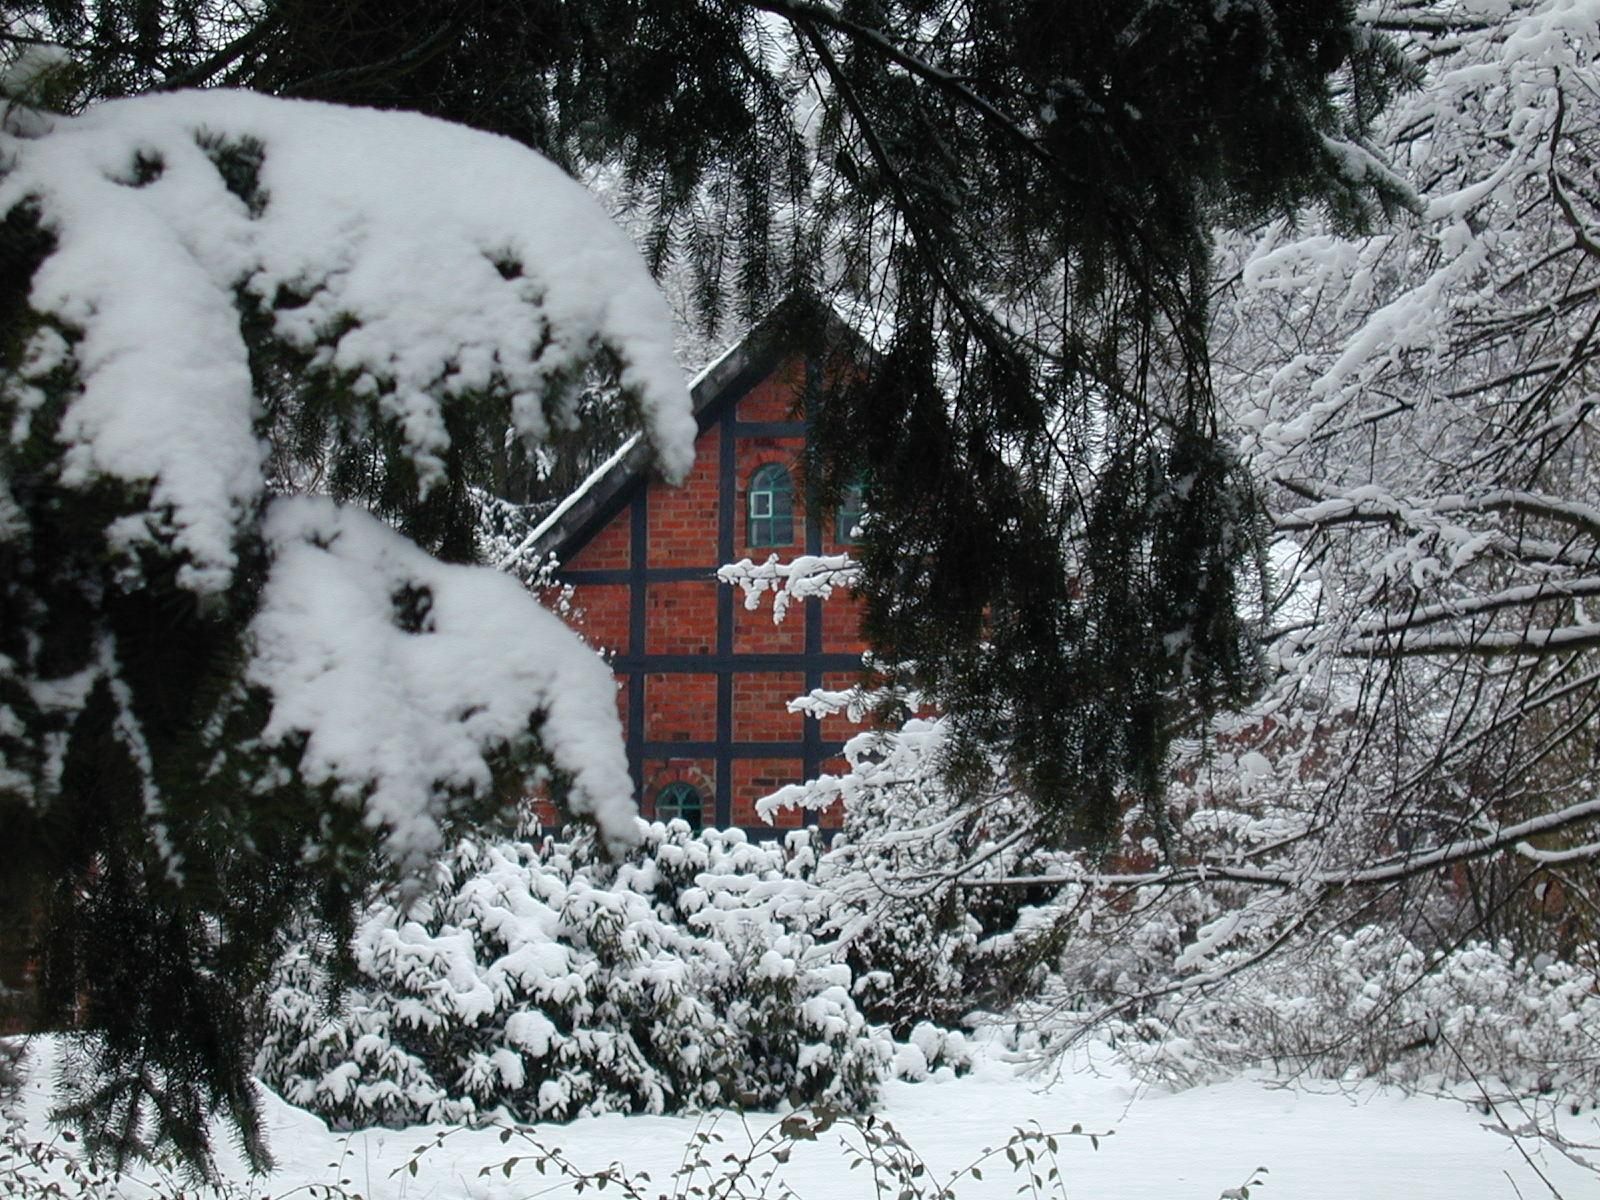 android nature, snow, branches, branch, house, spruce, fir, bricks